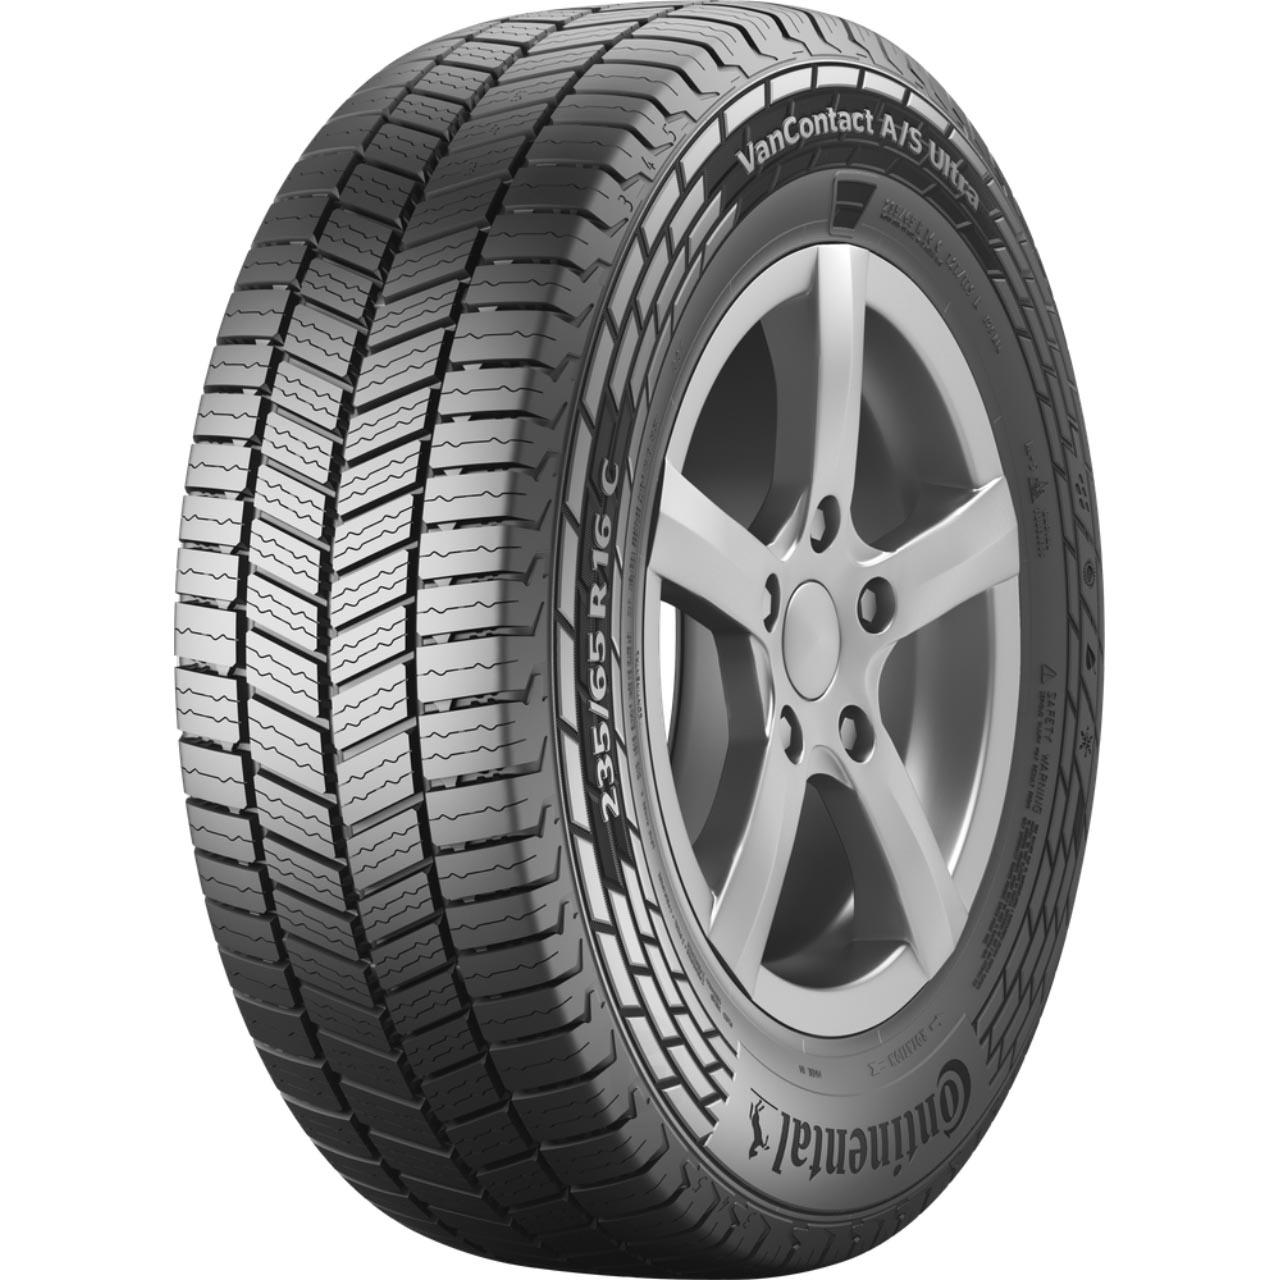 Continental VANCONTACT AS ULTRA 215/65R16C 109/107T